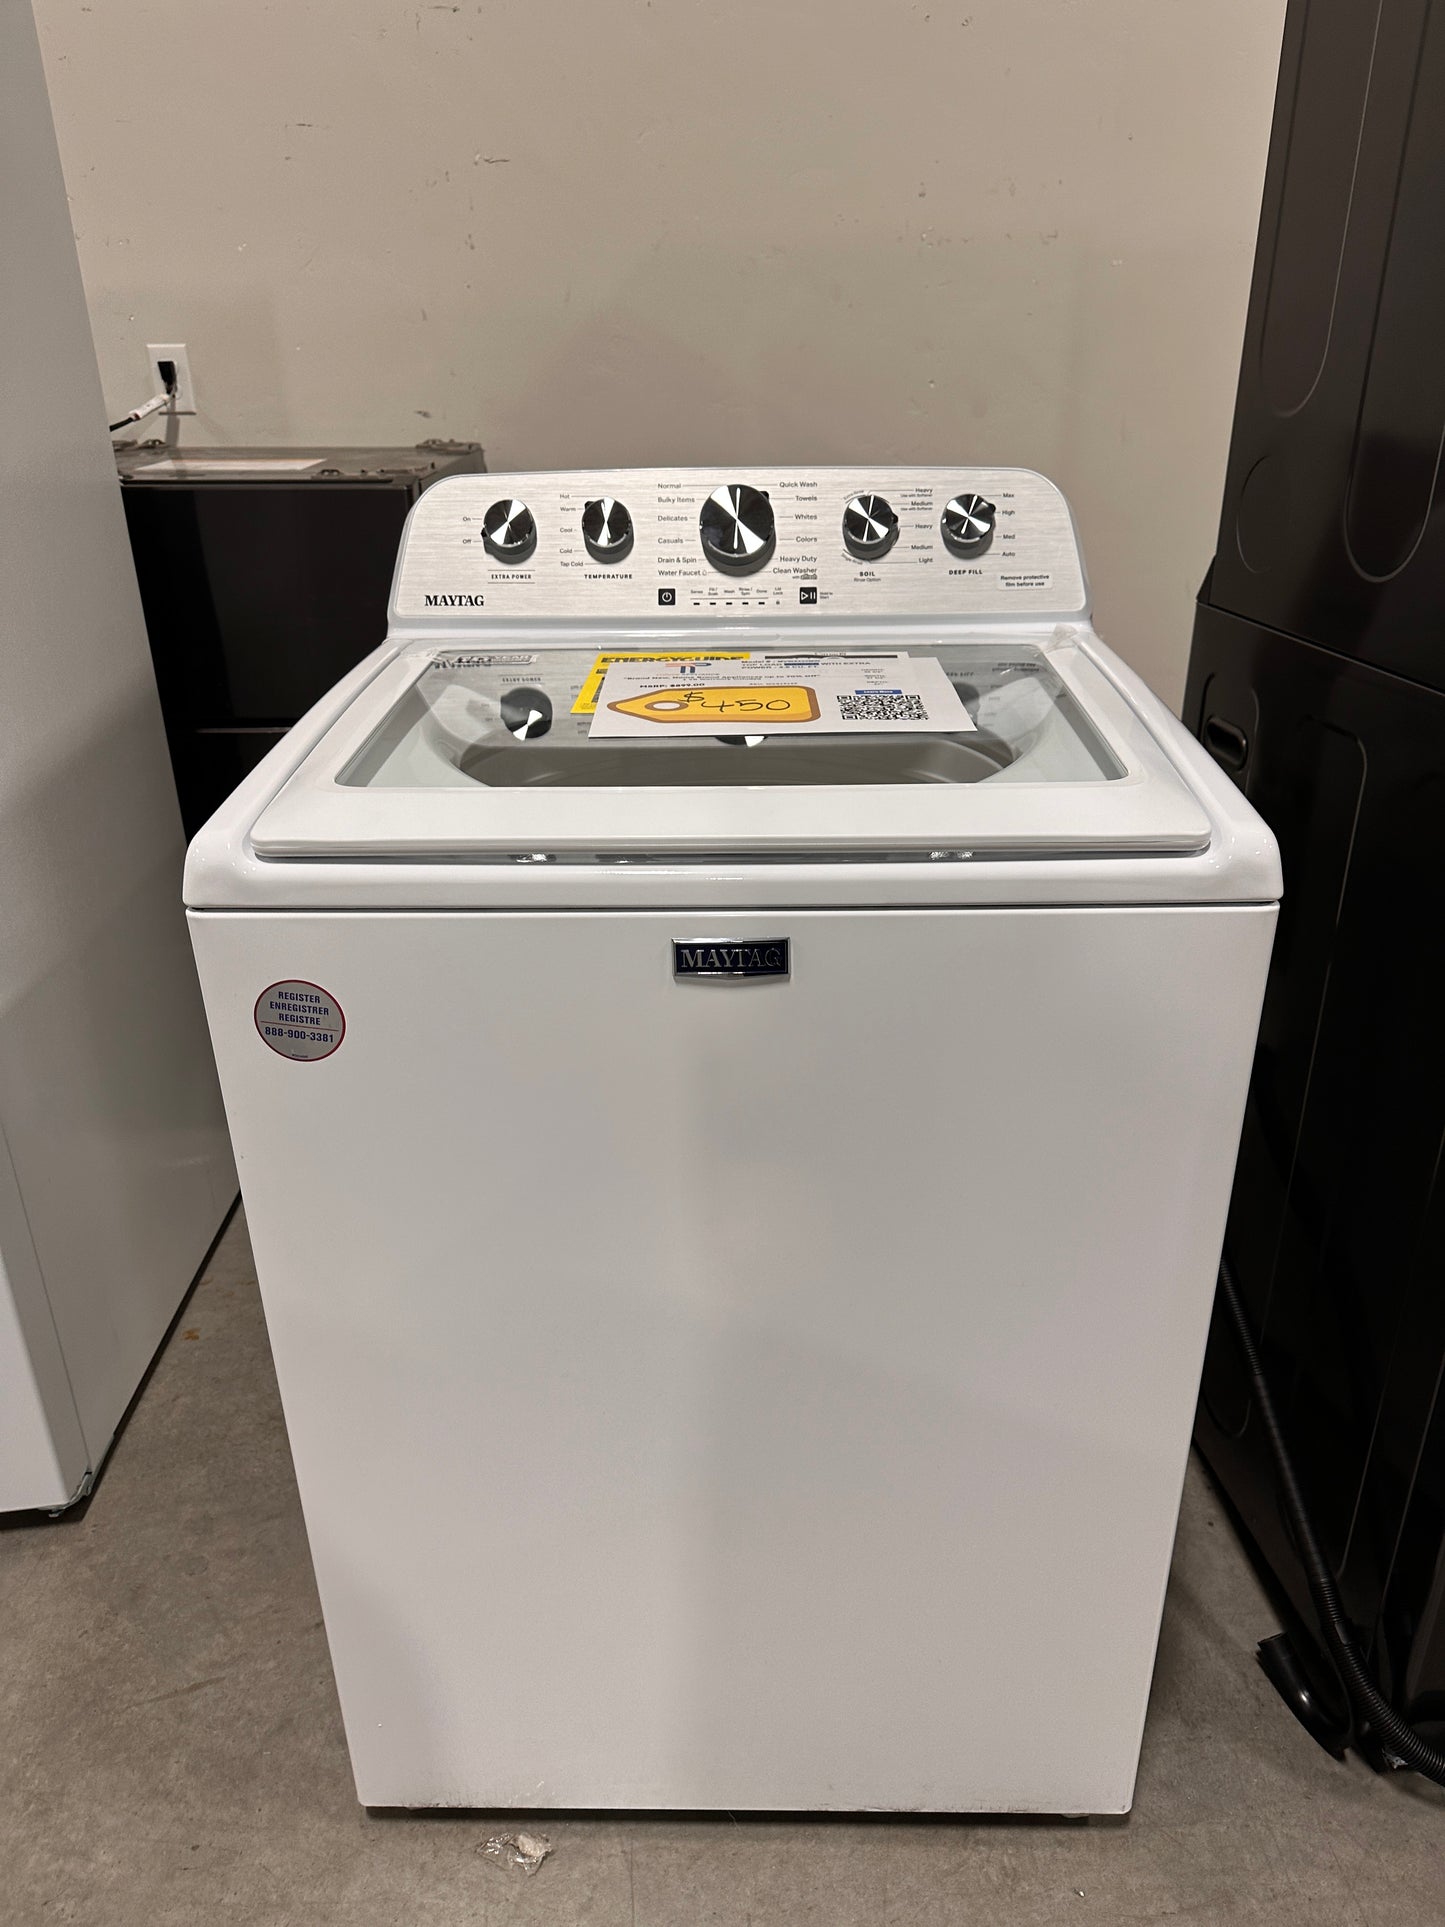 BRAND NEW MAYTAG TOP LOAD WASHER WITH EXTRA POWER BUTTON MODEL: MVW5430MW  WAS13155